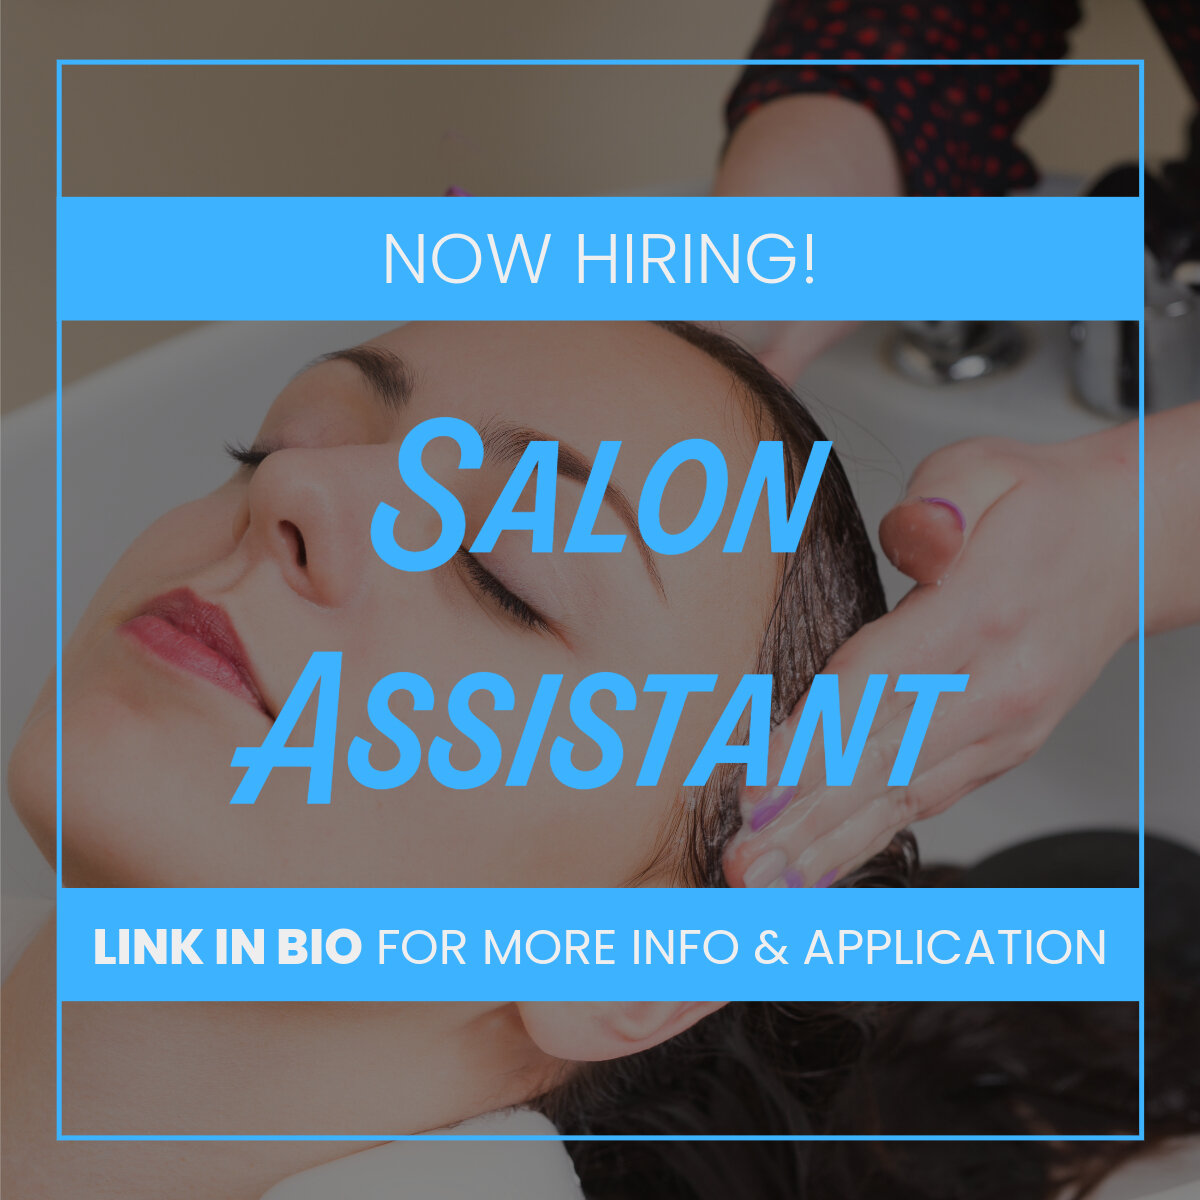 We are hiring a Salon Assistant! Check out the link in our bio if you, a friend, or a family member are looking for a great job with an opportunity to work with an amazing team!

#jobs #jobsboyntonbeach #salonjobs #salonjobspalmbeach #salonassistantj